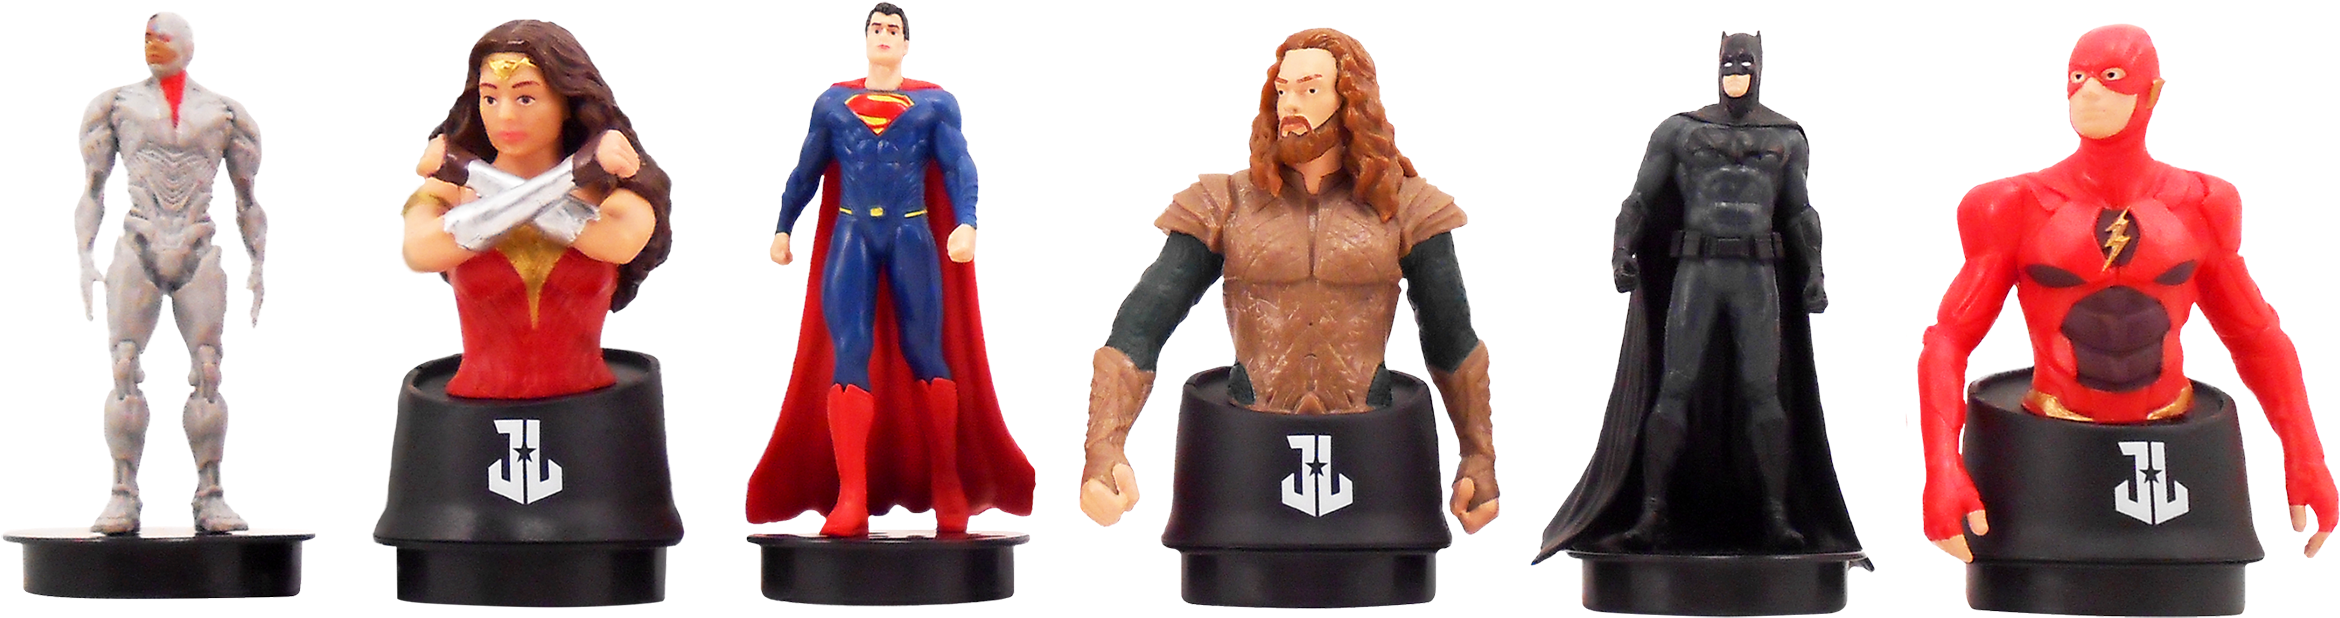 Justice League Figurines Collection PNG